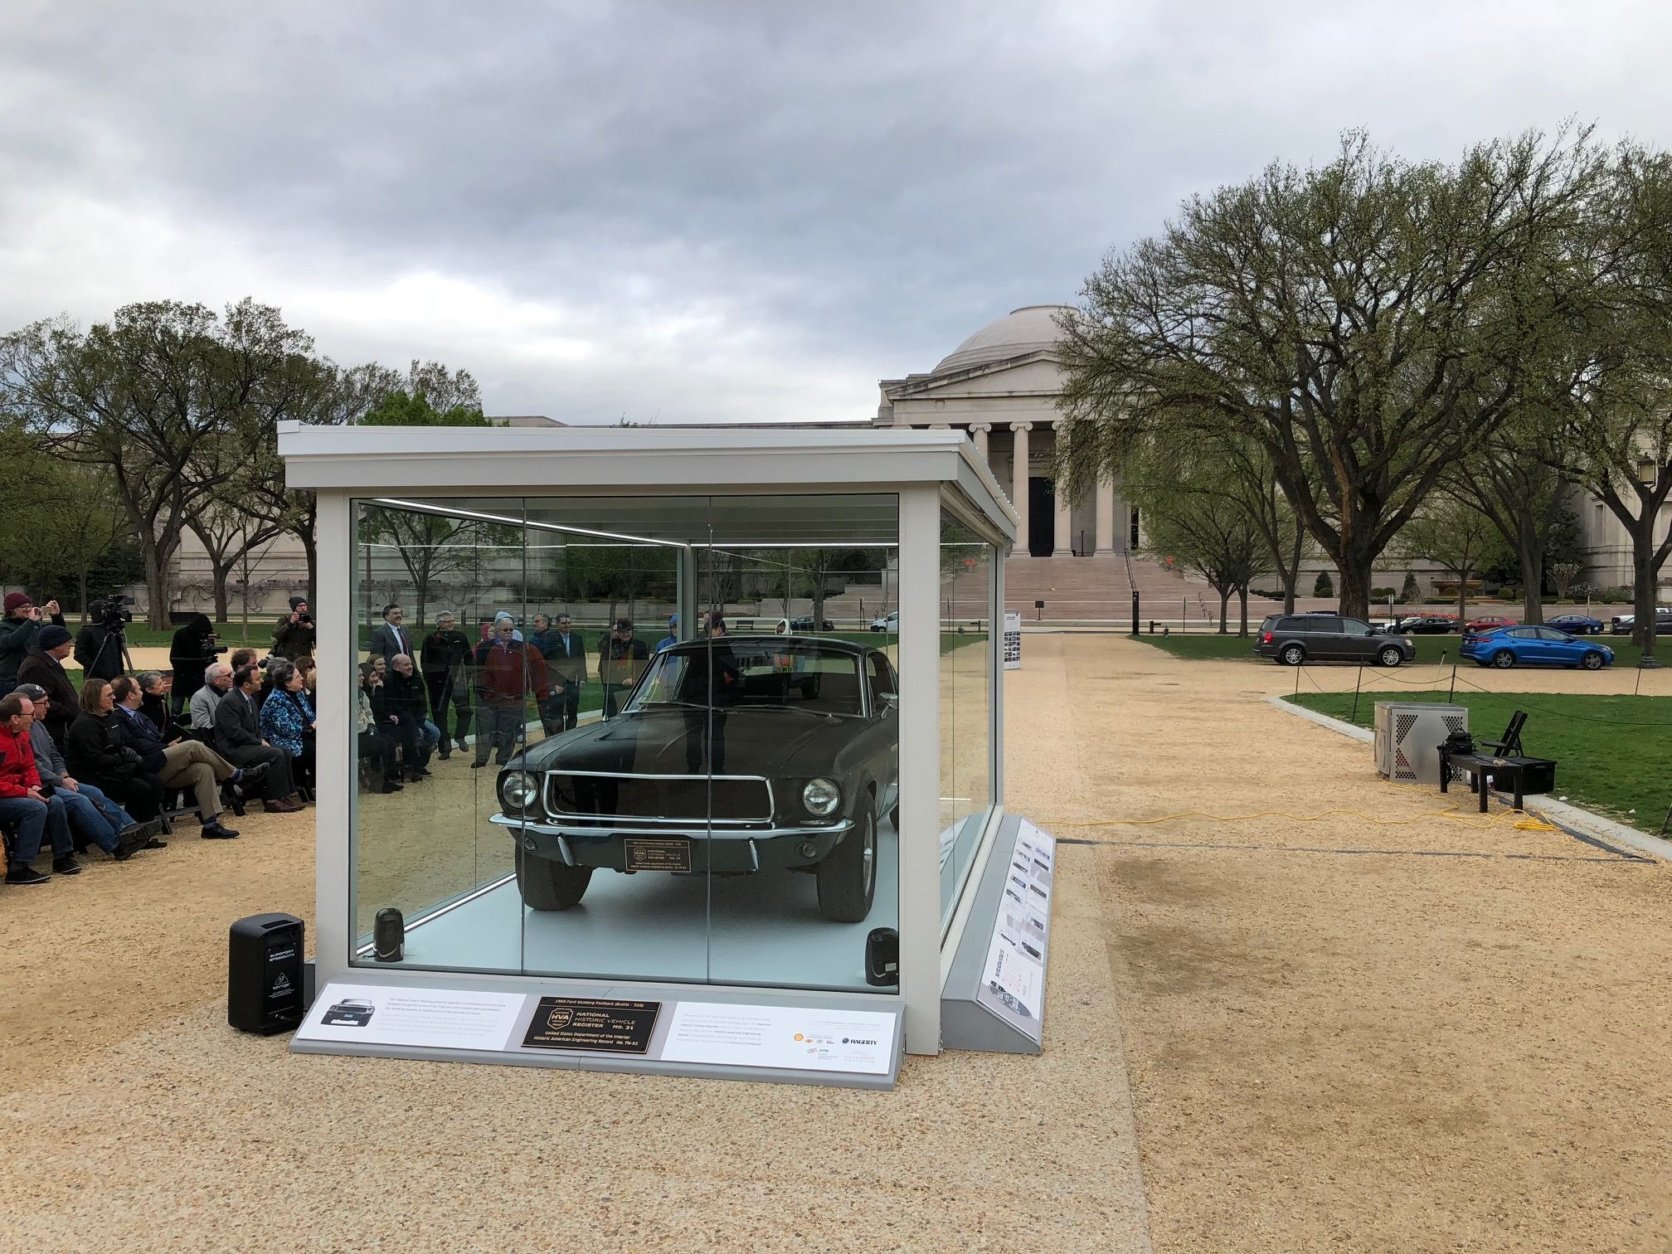  Gessler called the glass-walled display between the National Air and Space Museum and the National Gallery of Art "the world’s smallest car museum." (WTOP/John Aaron)